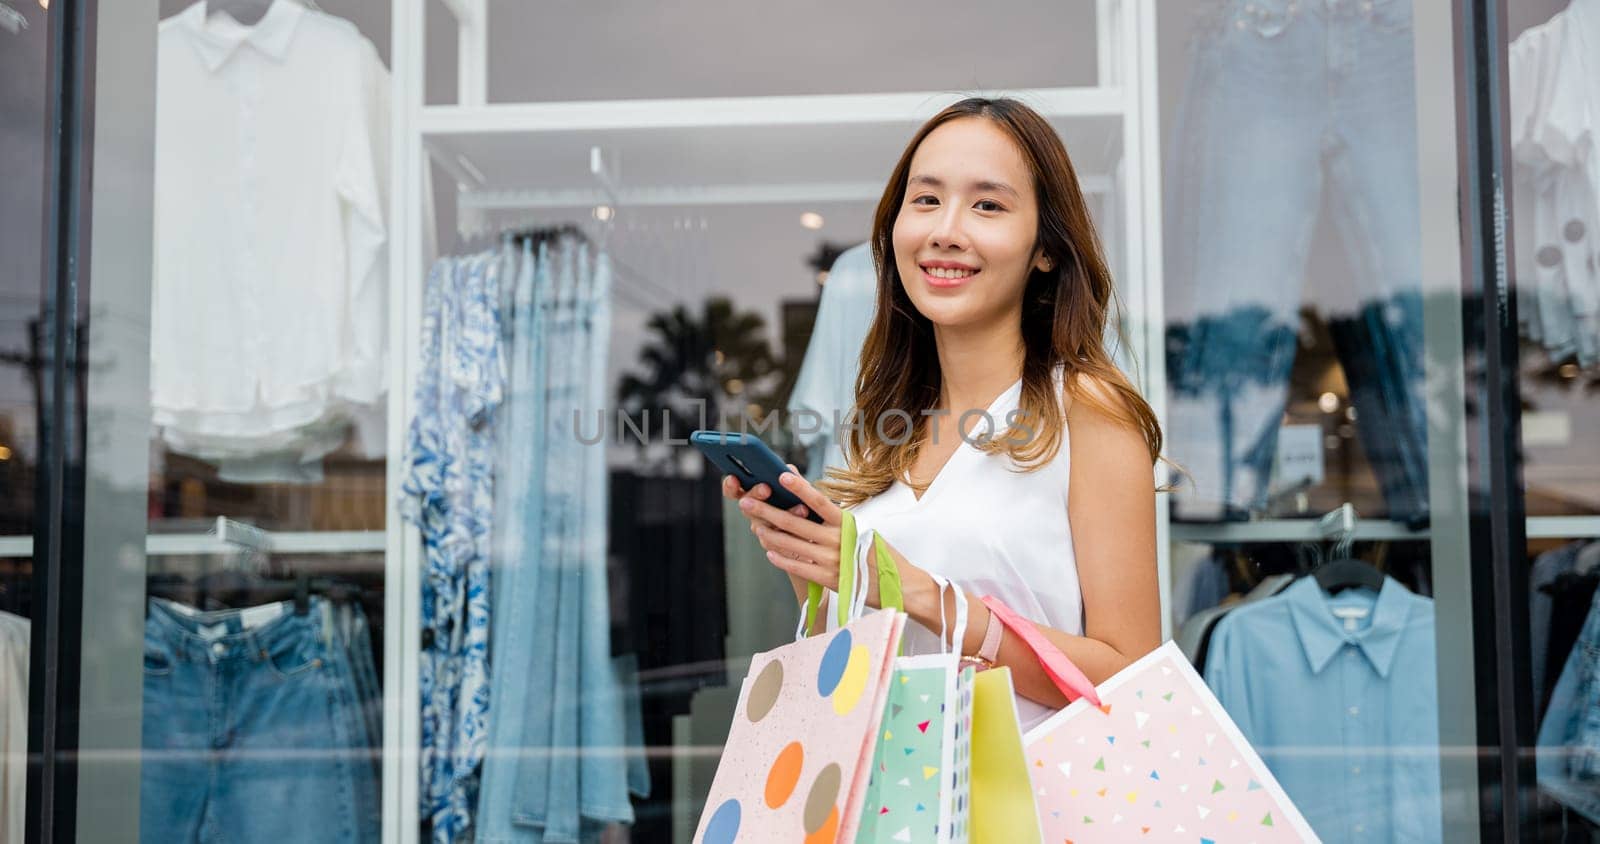 A woman with shopping bags and a cell phone stands in front of a store window. She's a modern shopper using technology to browse online for the best deals and promotions.